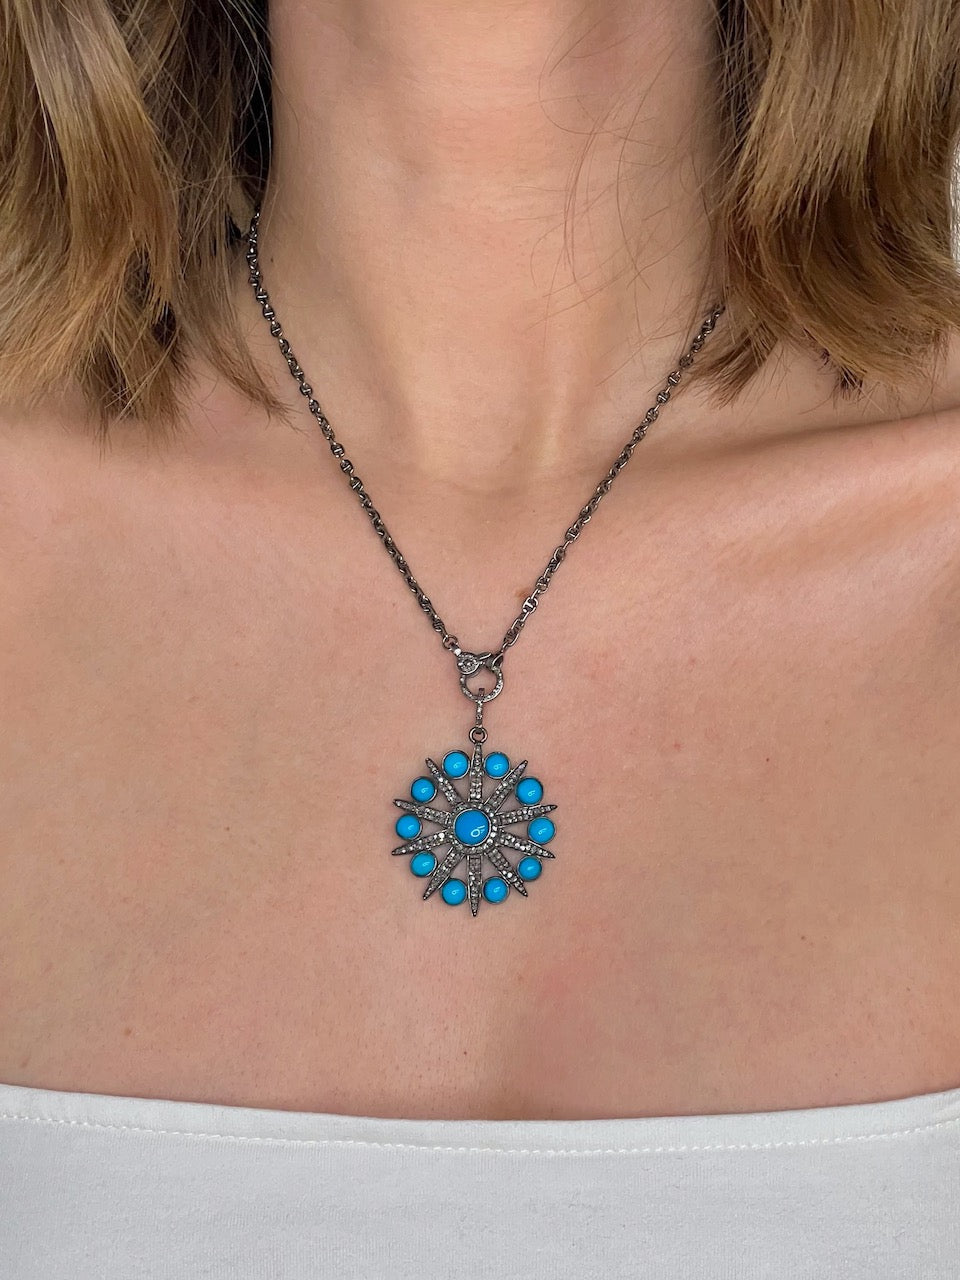 Turquoise and Pave Diamond Starburst on Sterling Silver